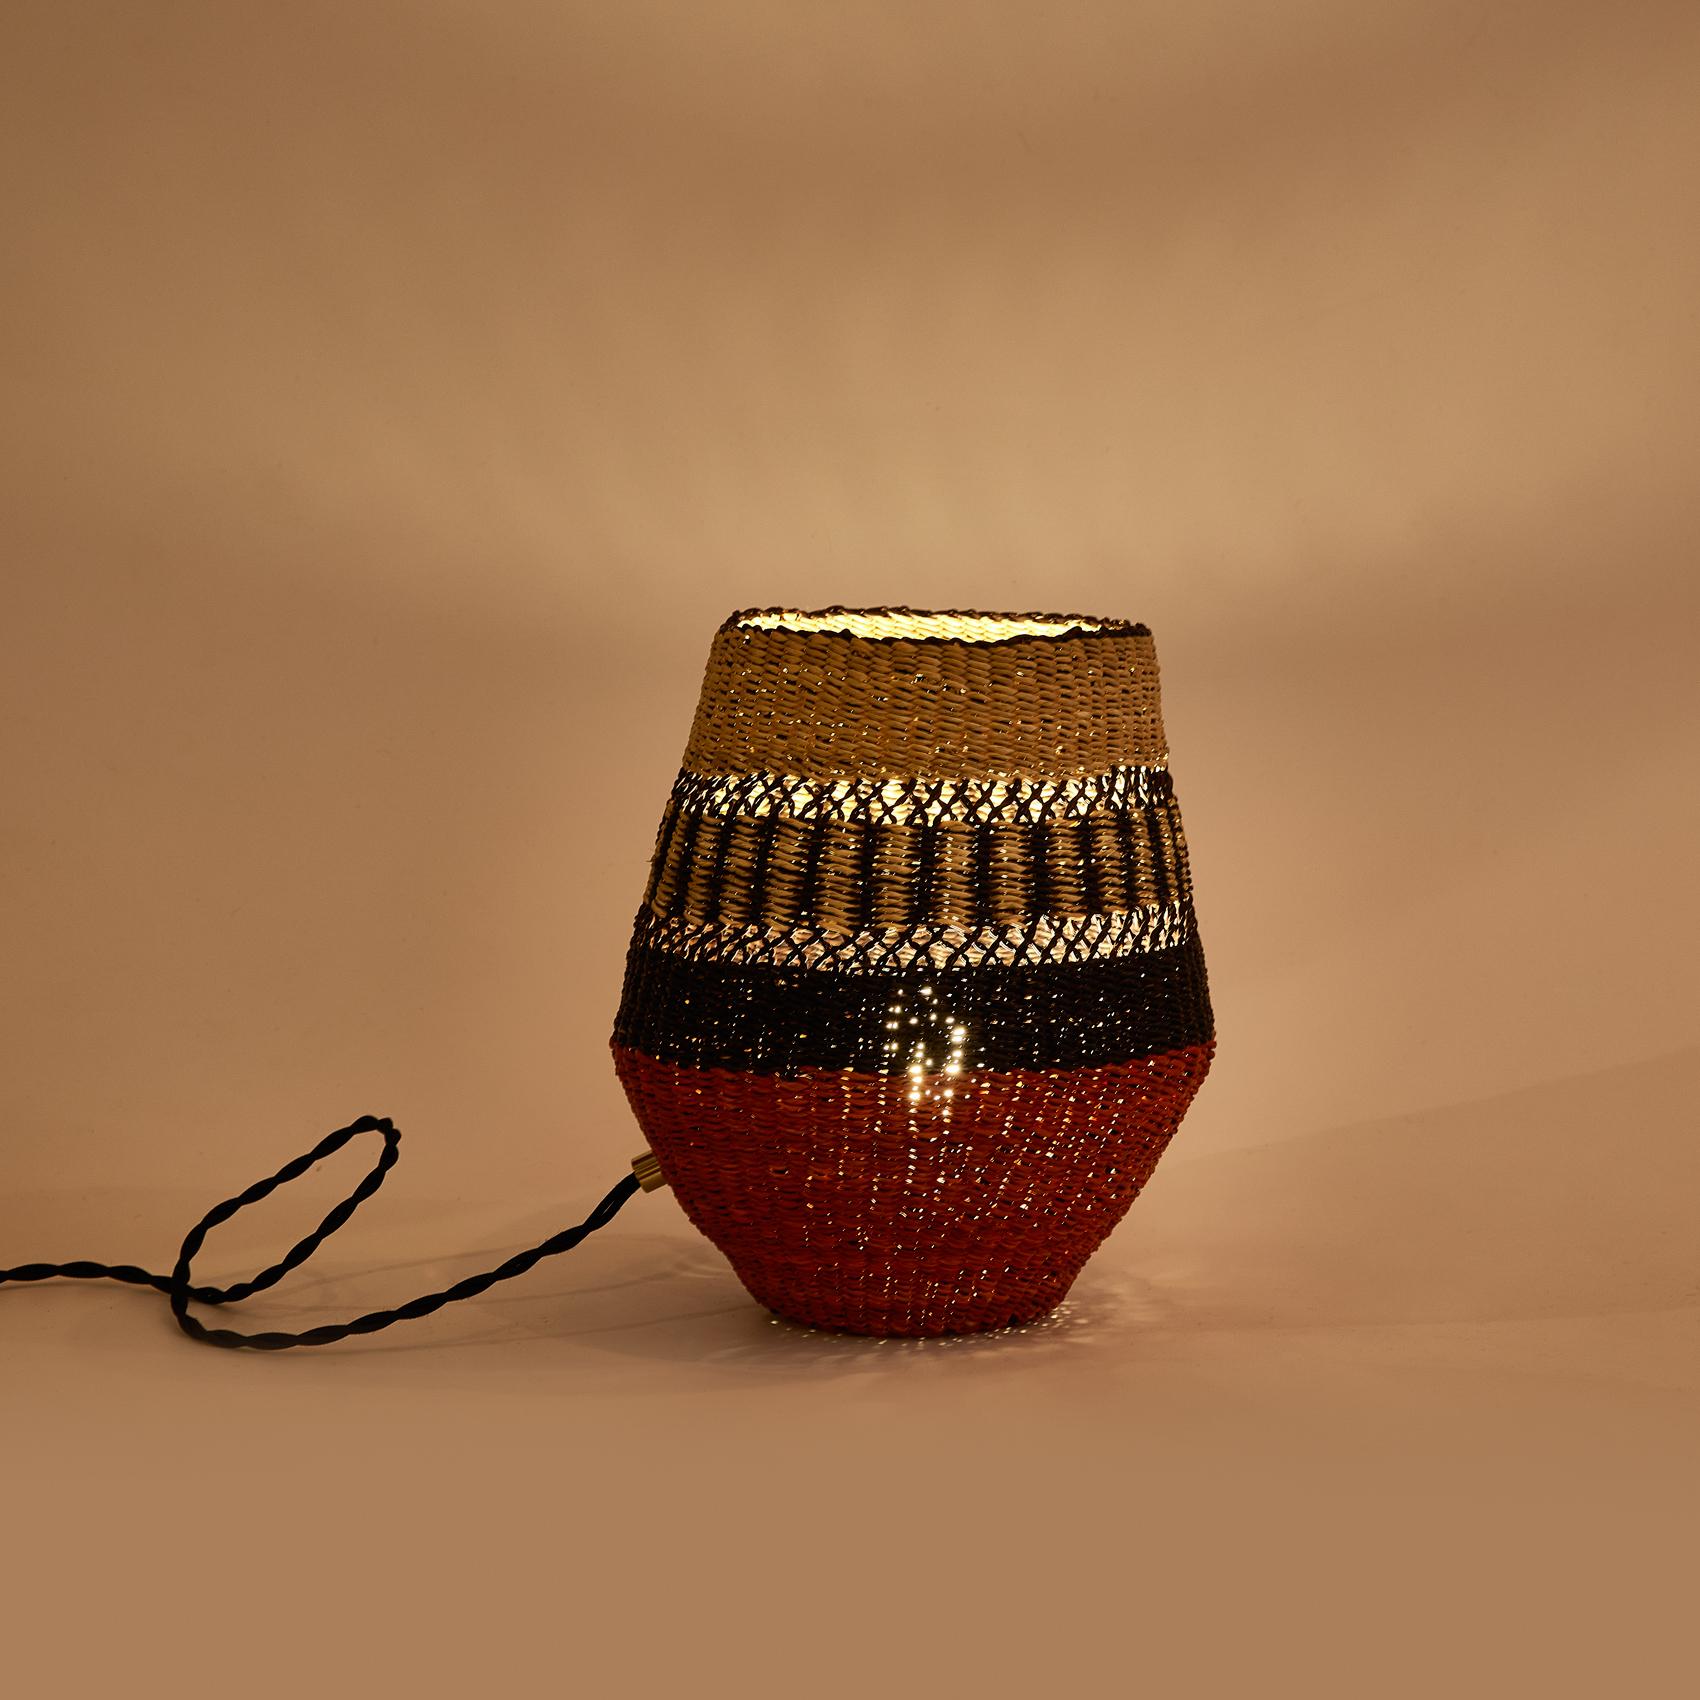 Woven table lamp
Colours: Natural and Black punctuated by a Terracotta Red

Are you looking for unexpected objects to decorate your home? This base shaped table lamp is delicately woven and will be a funky element in your room (measuring